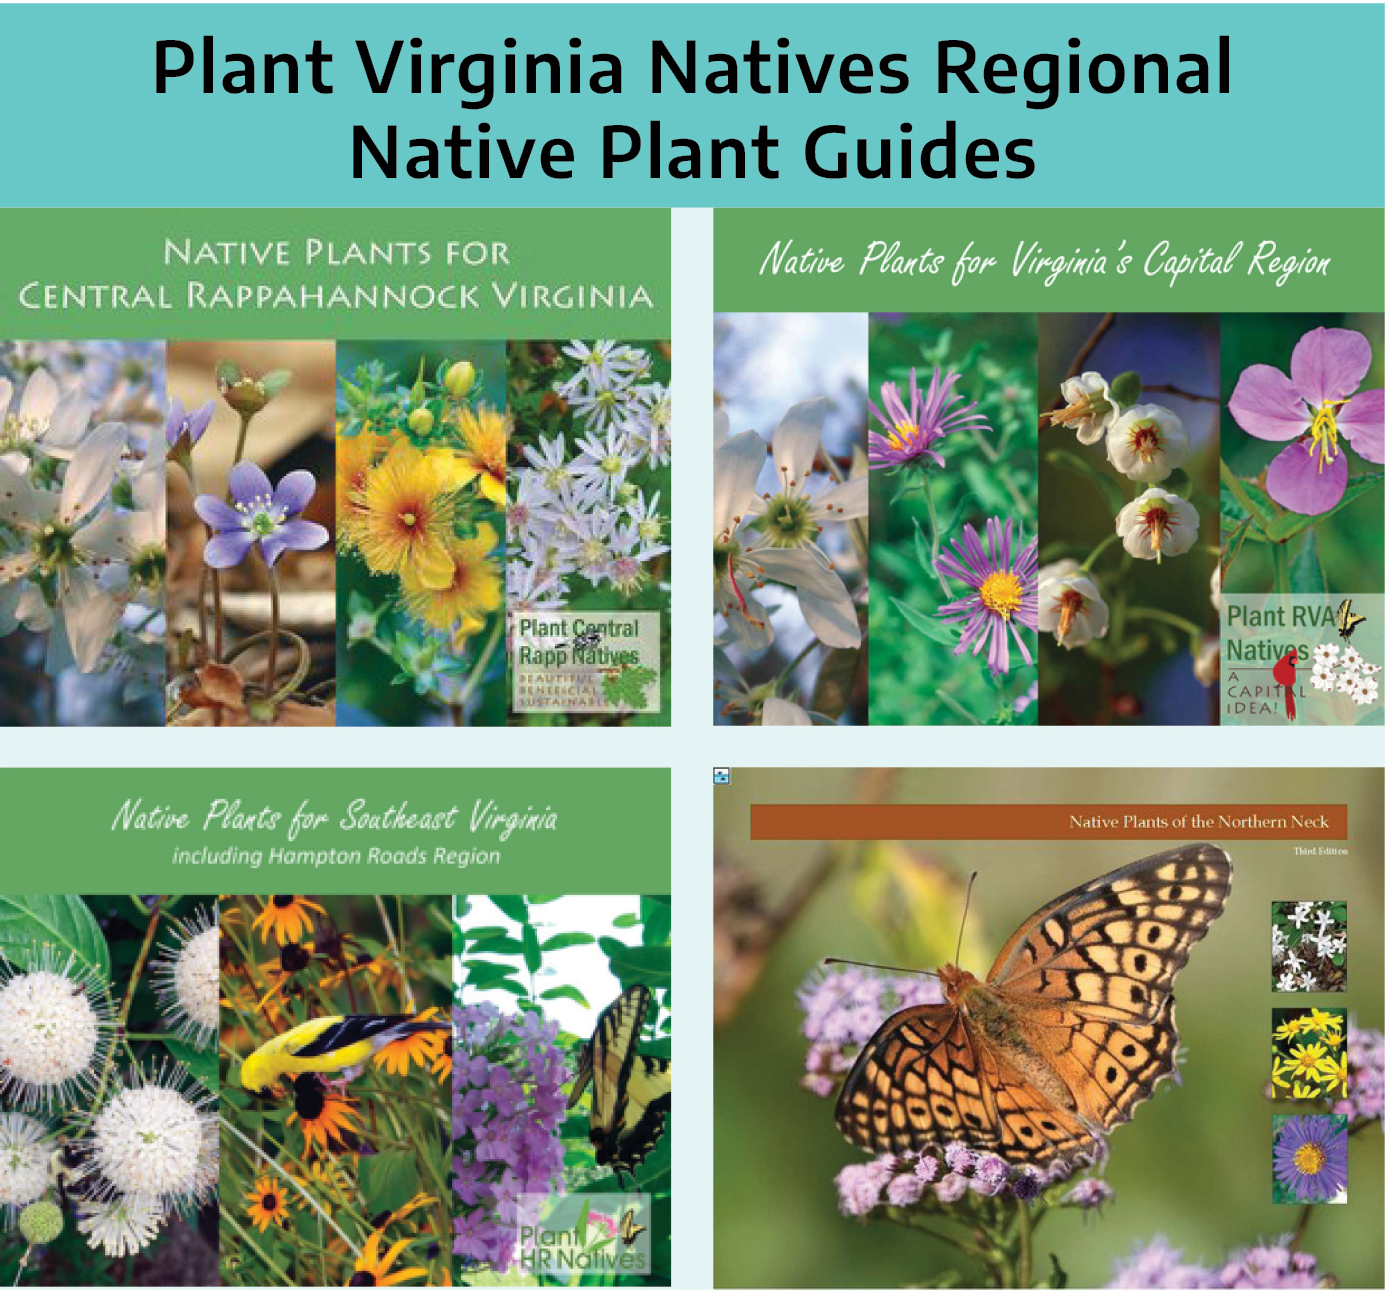 Four photographs. The first is titled "native plants for central Rappahannock Virginia"; showing small white flowers, purple flowers with white center, yellow papery flowers with a reddish center, and a cluster of white flowers with yellow center. The second is titled "native plants for Virginia's capitol region"; showing a white flower that is star shaped with a darker colored center, small feathery purple flowers with a white center, small white papery flowers with a reddish and yellow center, a small purple flower with a yellow center. The third is titled "native plants for southest virginia"; showing a white fluffy flower, yellow flowers with a brown center, and a cluster of small purple flowers with a yellow and black butterfly. The fourth is showing a brownish orange butterfly with black patterns throughout the wings and is set on small purple flowers.